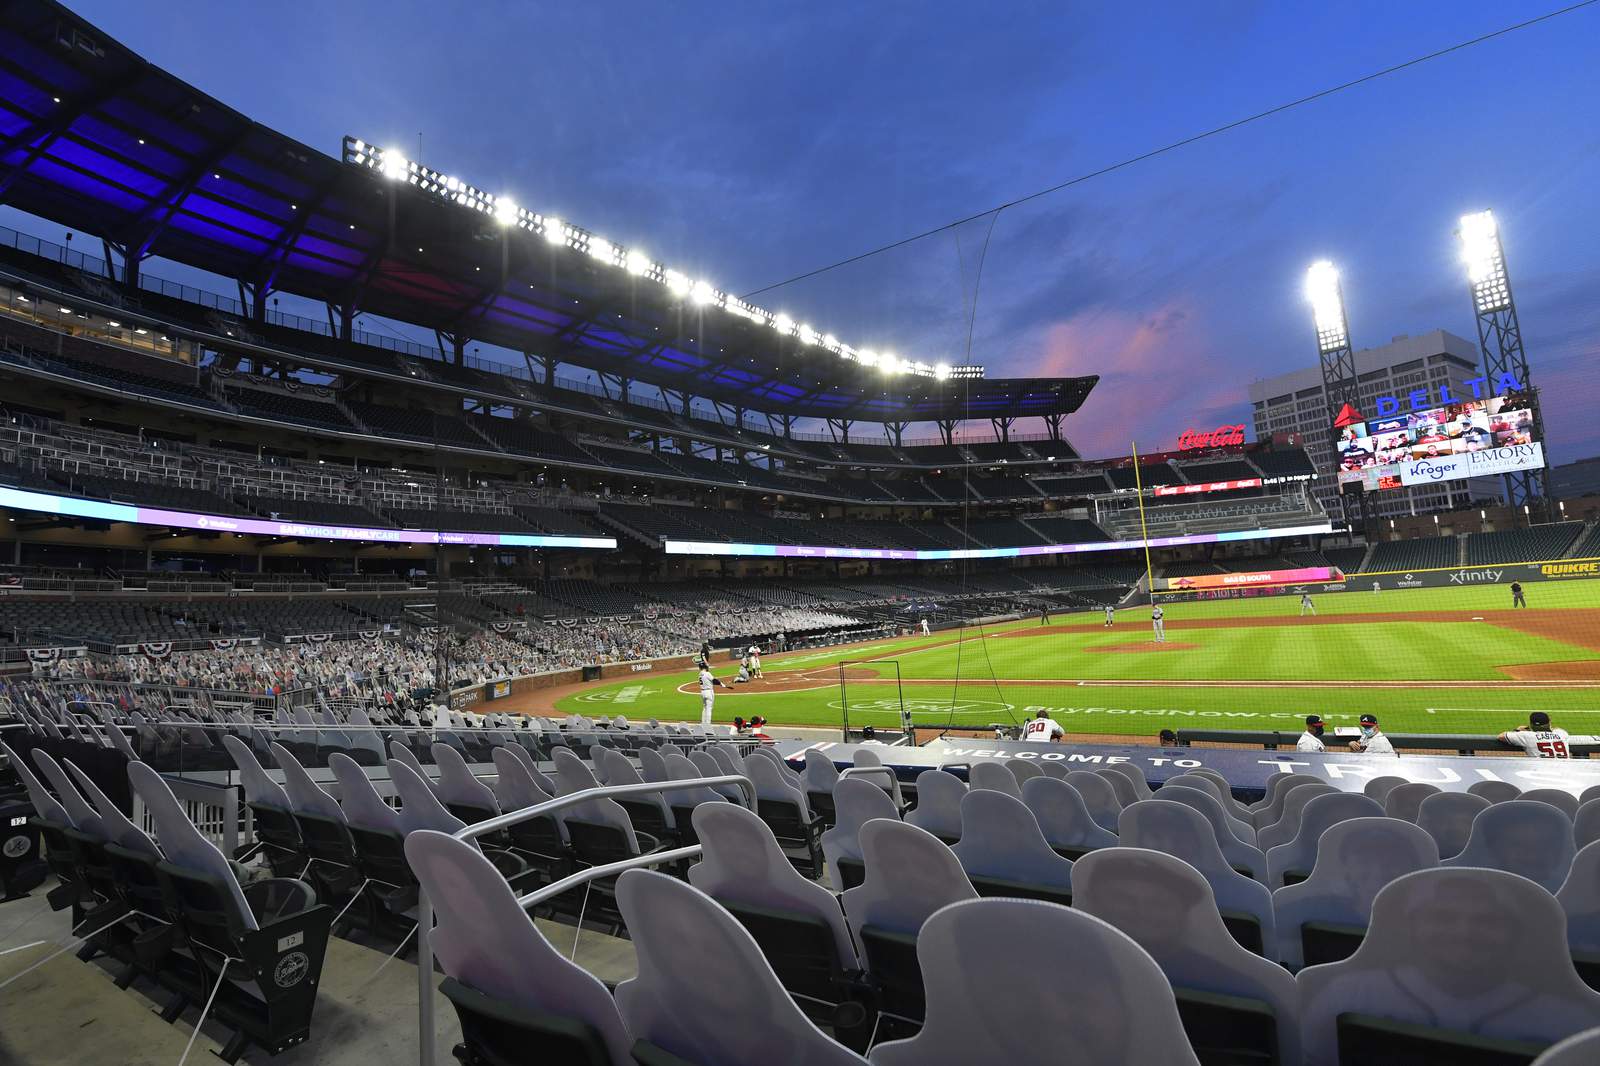 Amid glow open day, cloud looms over MLB All-Star Game